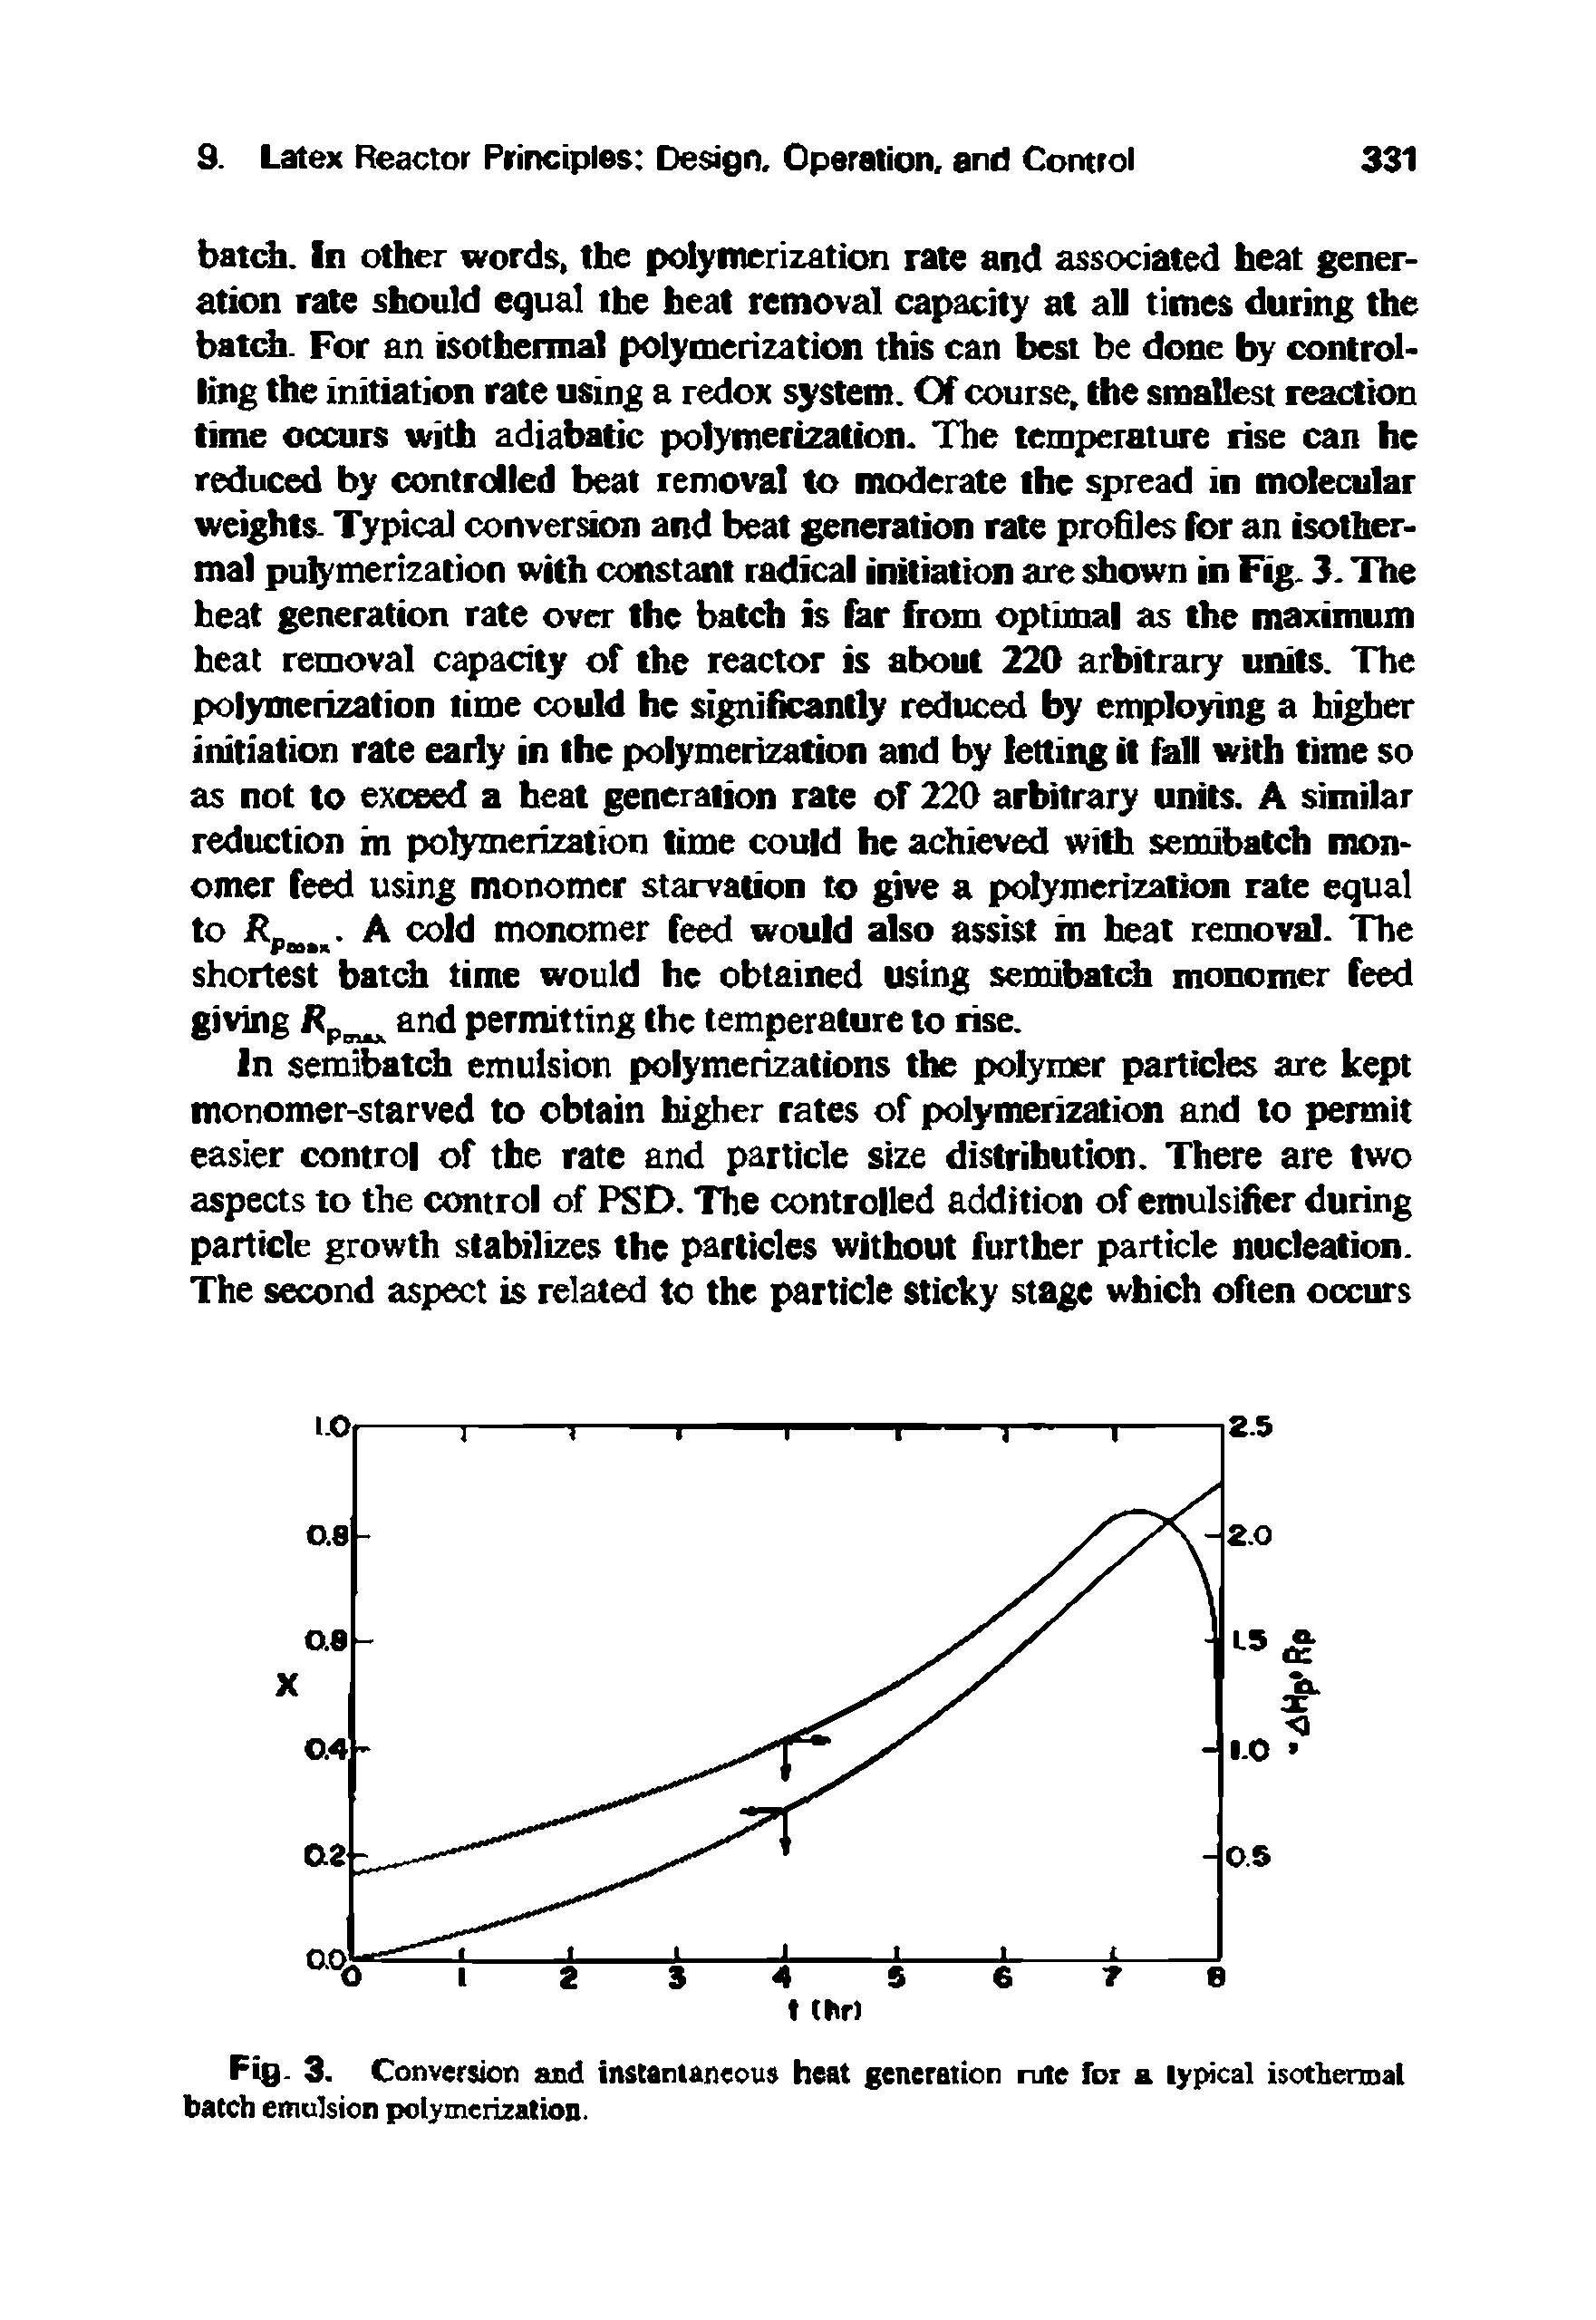 Fig. 3. Conversion and instantaneous heat generation lute for a lyincal isothennal batch emulsion polymerization.